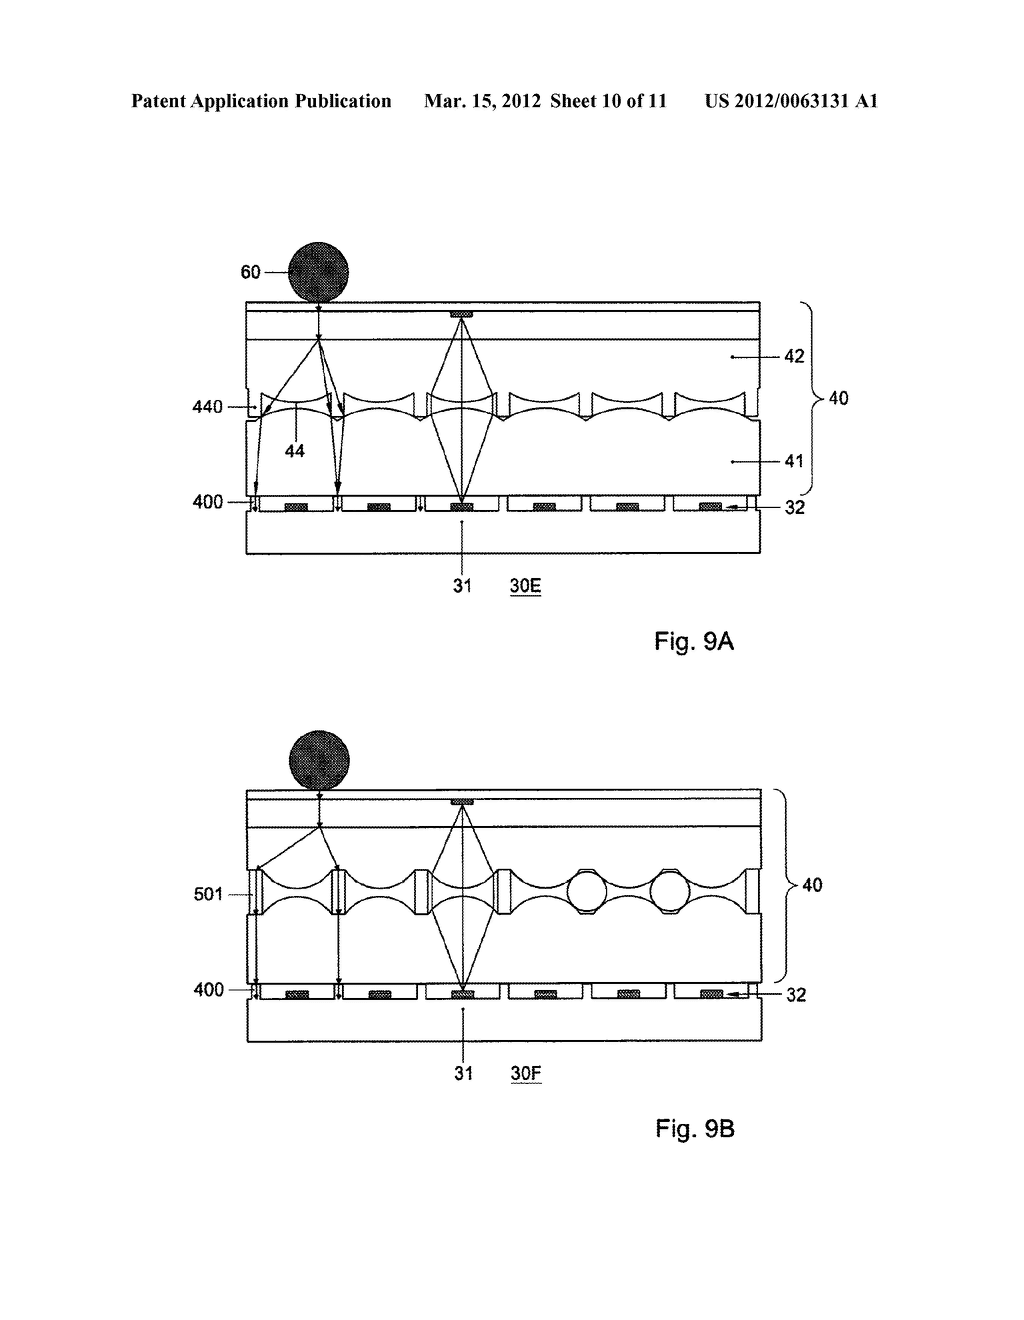 Illumination System for Use in a Stereolithography Apparatus - diagram, schematic, and image 11